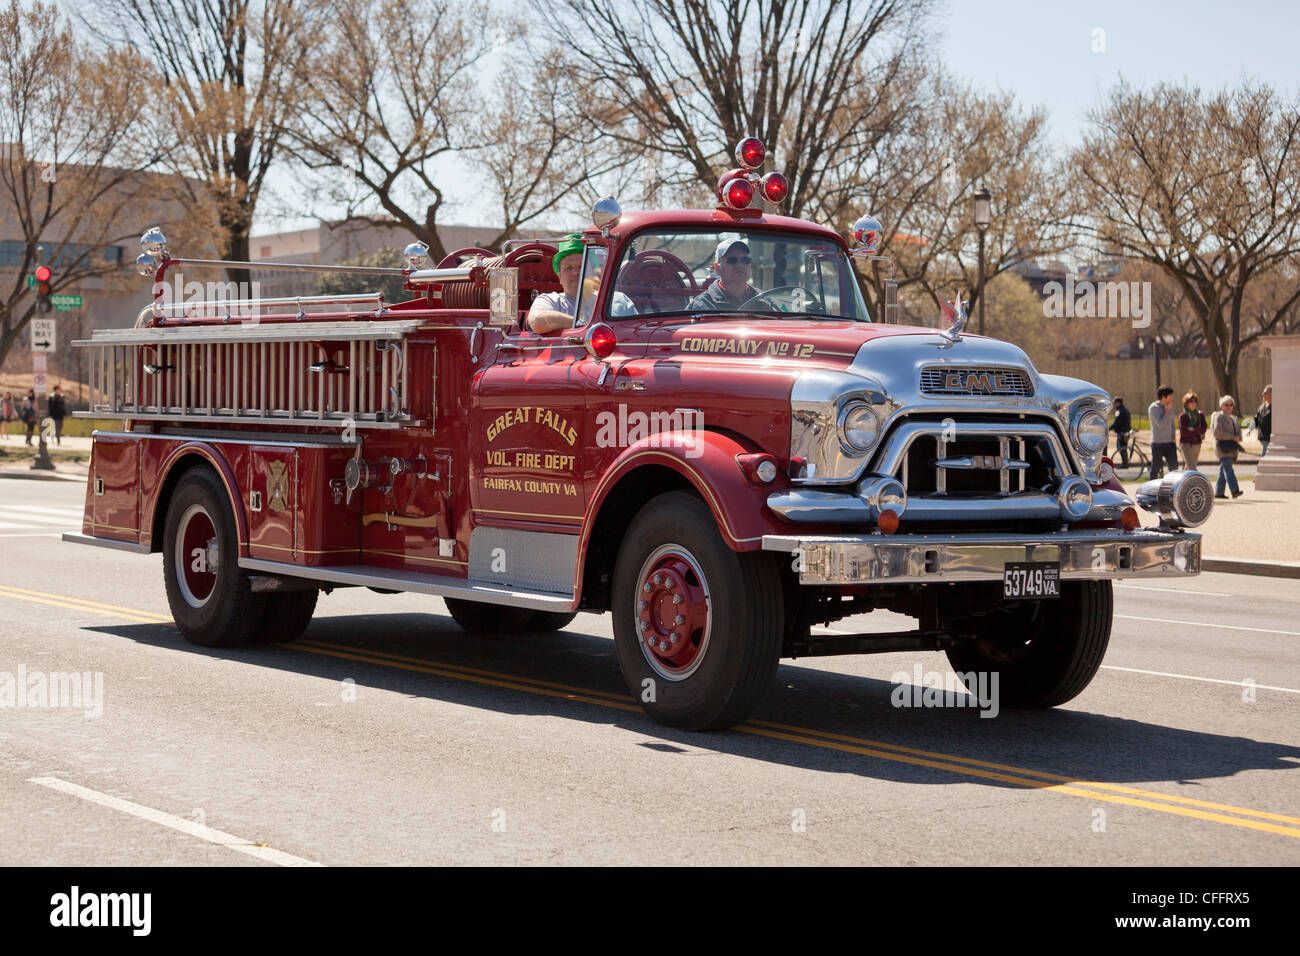 A vintage fire engine Stock Photo